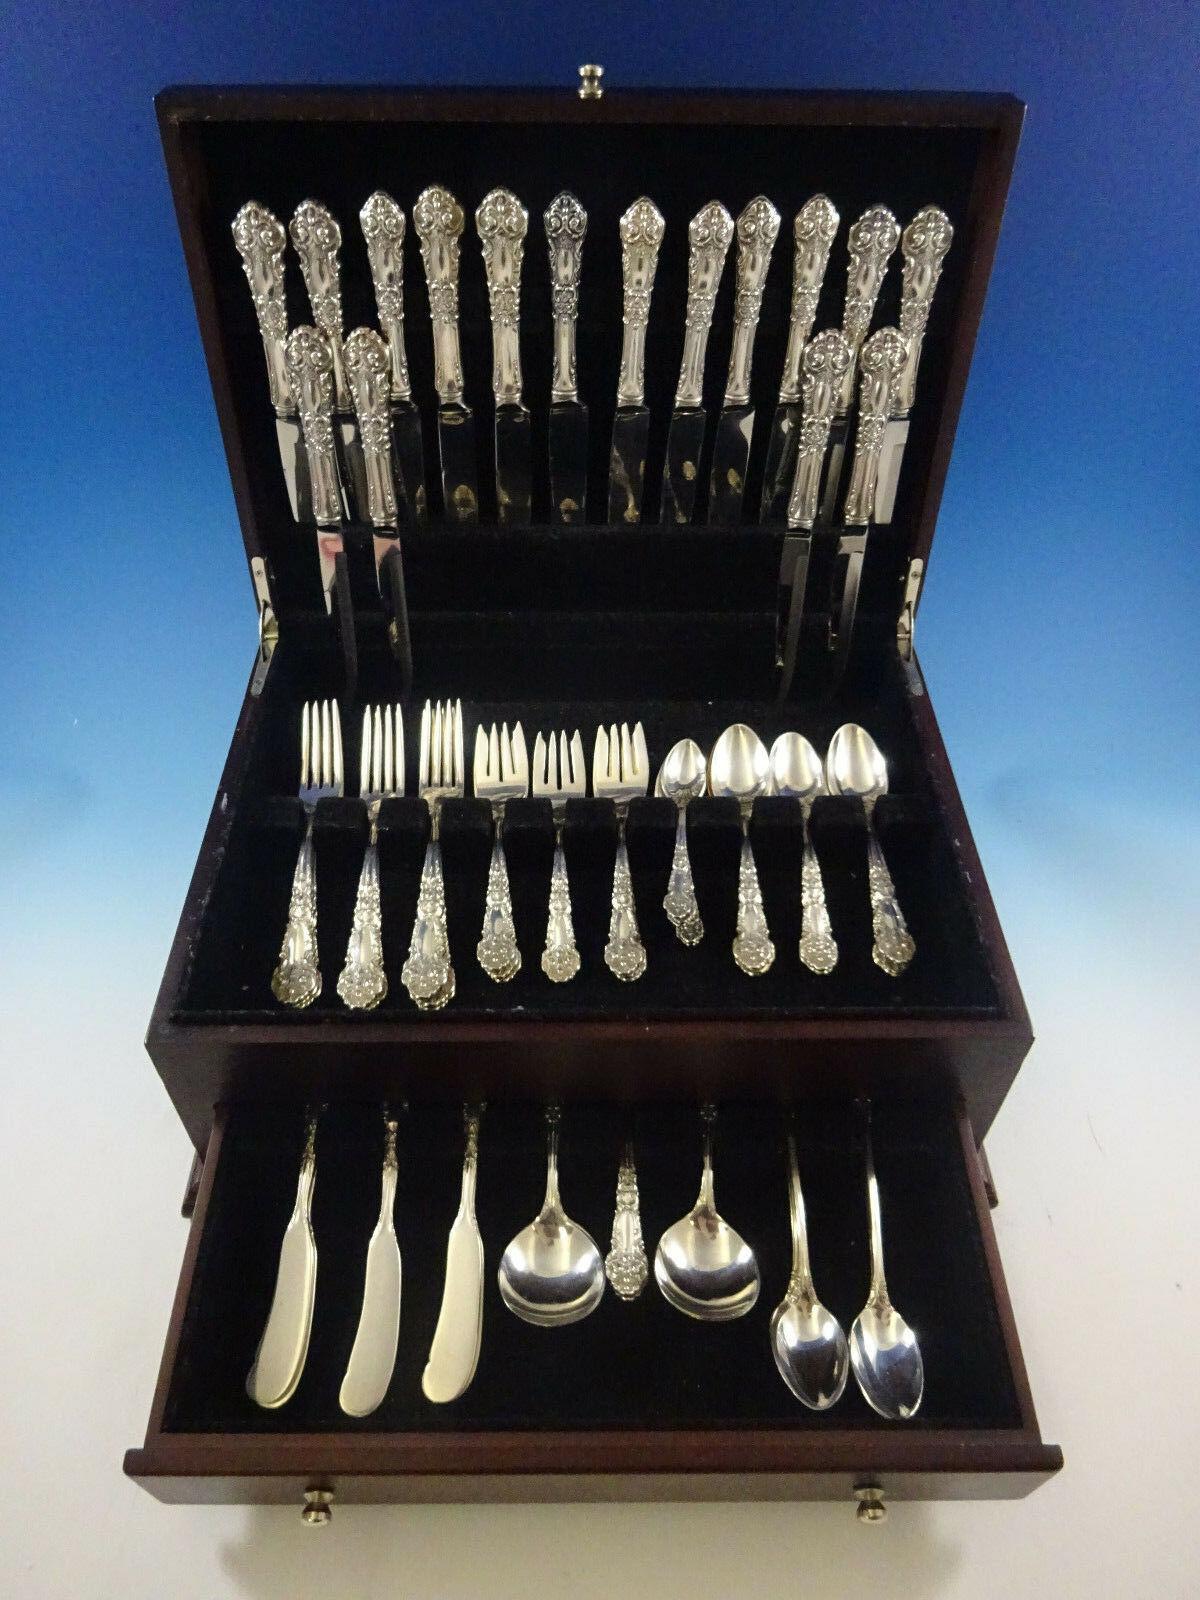 French Renaissance by Reed & Barton sterling silver Flatware set - 72 Pieces. This set includes:

8 knives, 8 7/8